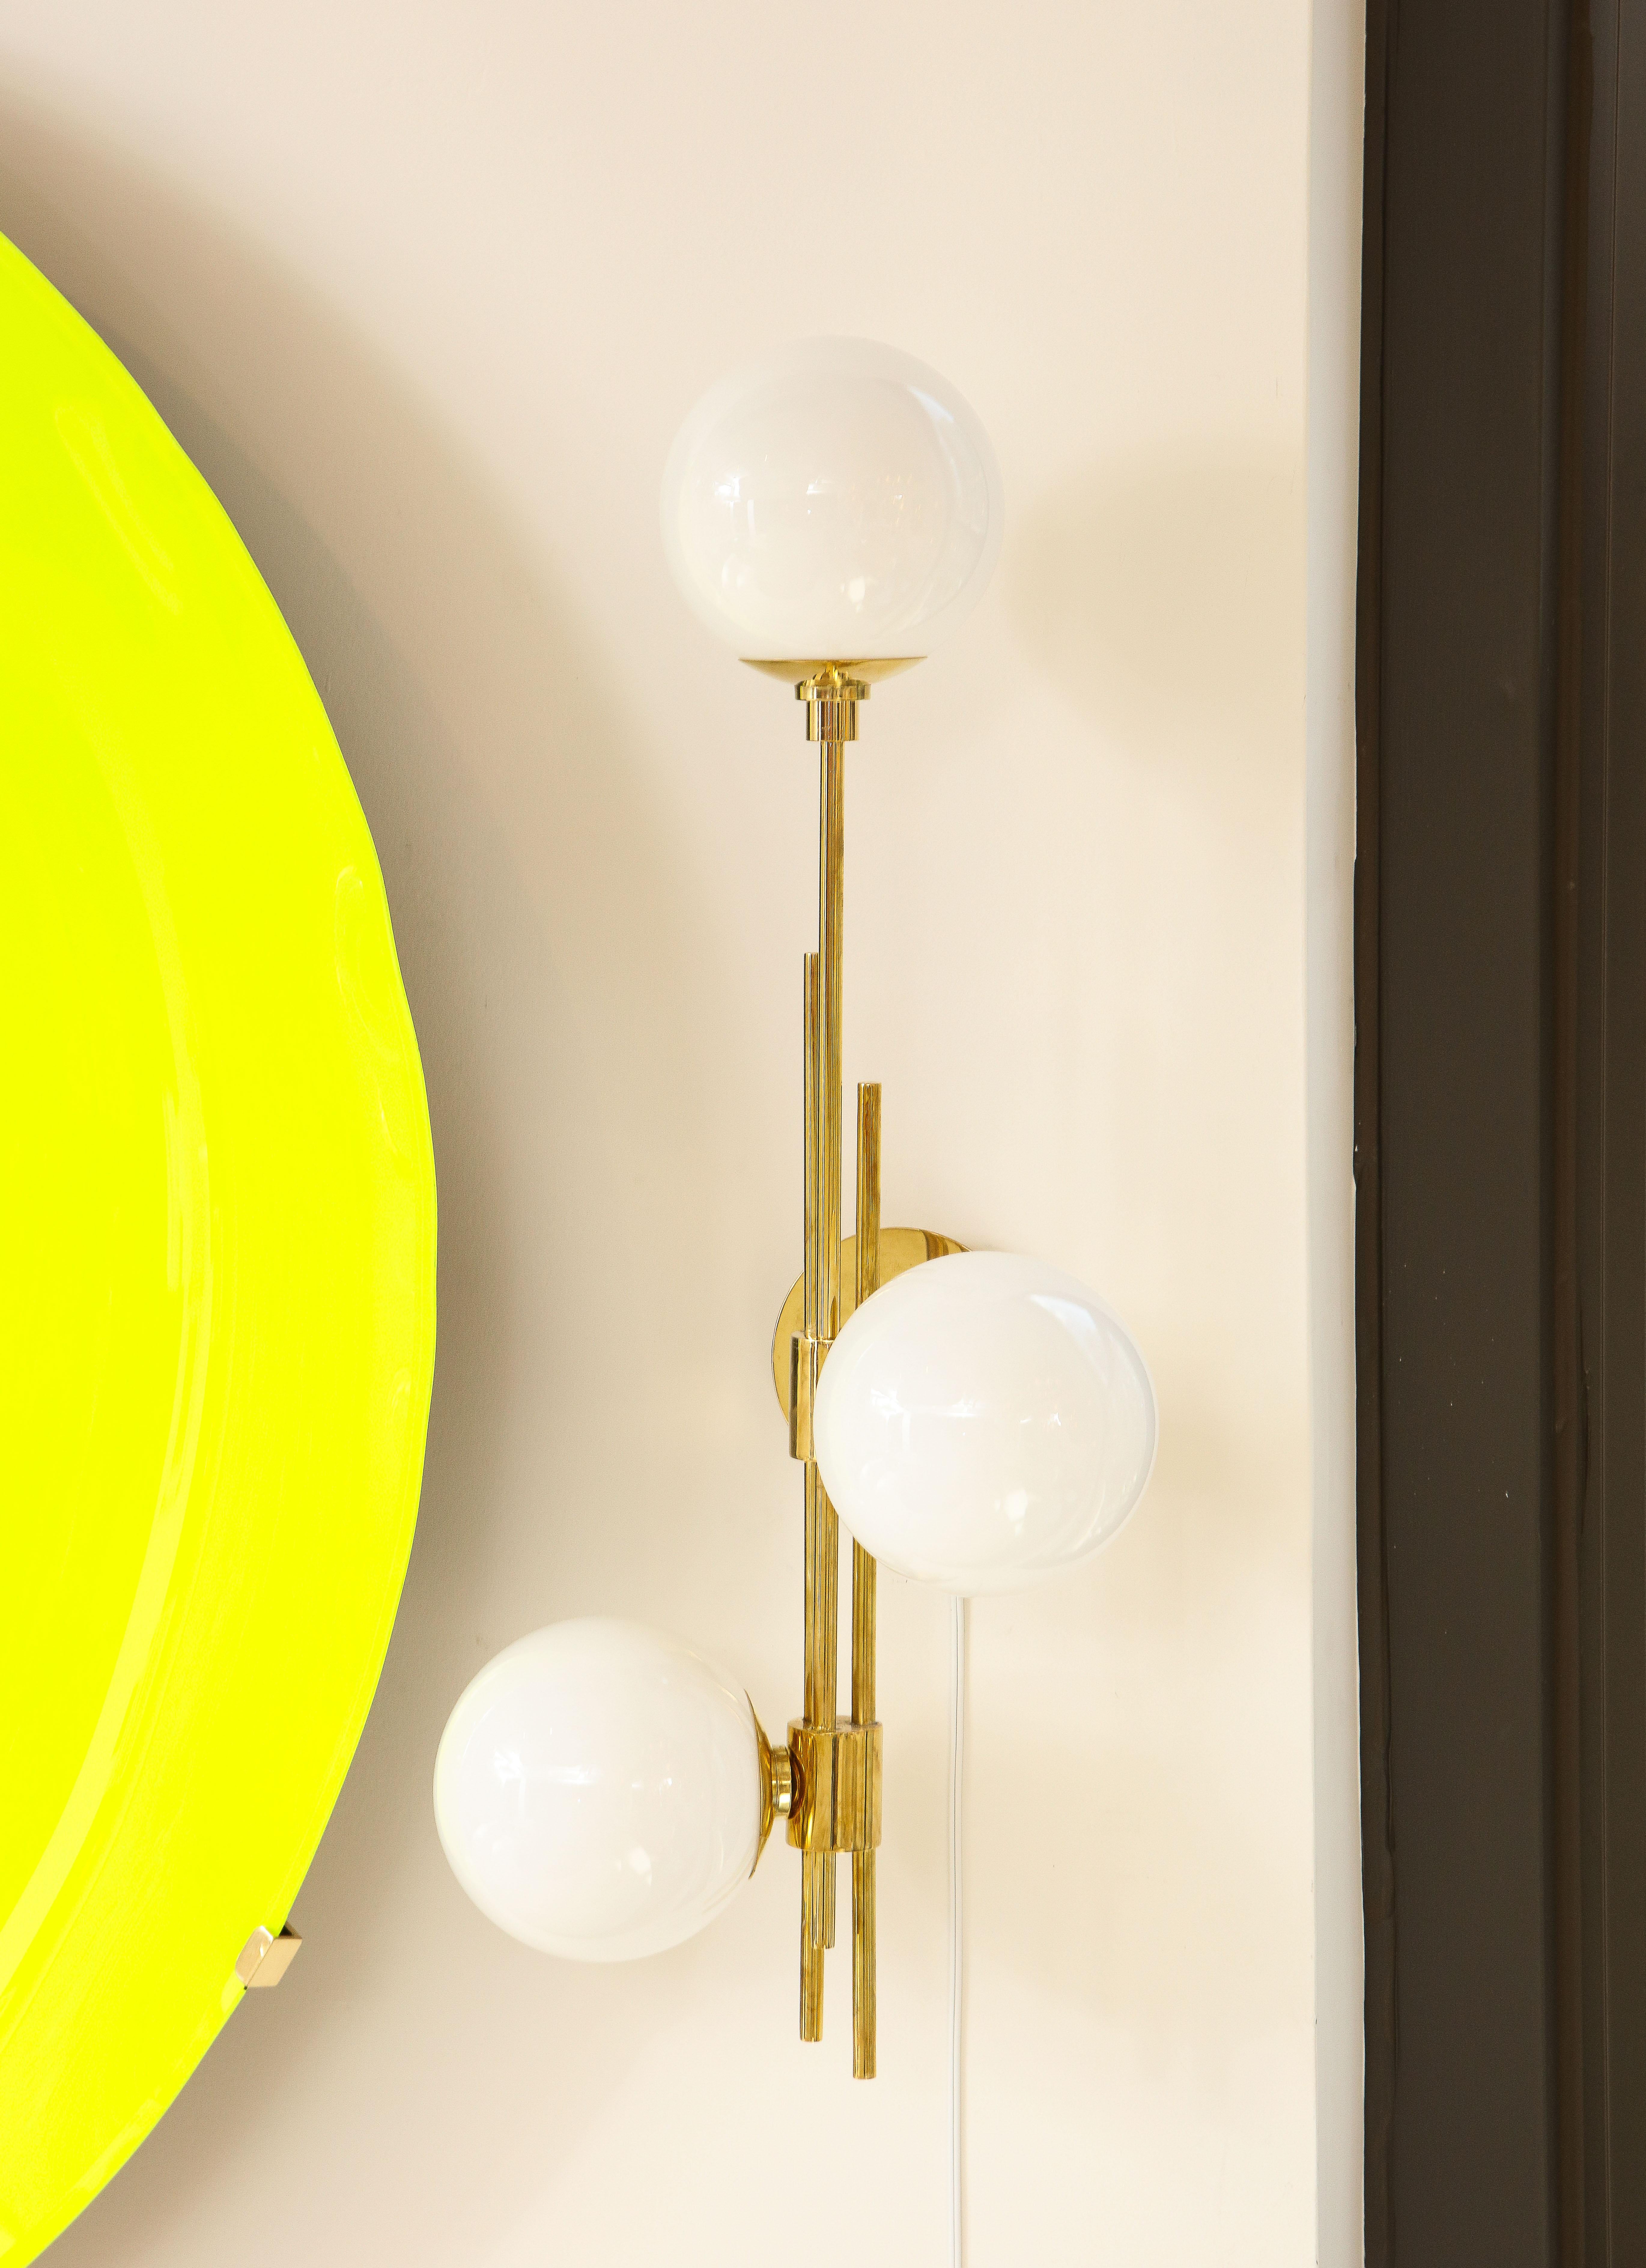 Tall Pair of Translucent White Murano Glass Globes and Brass Sconces, Italy 2022 For Sale 3